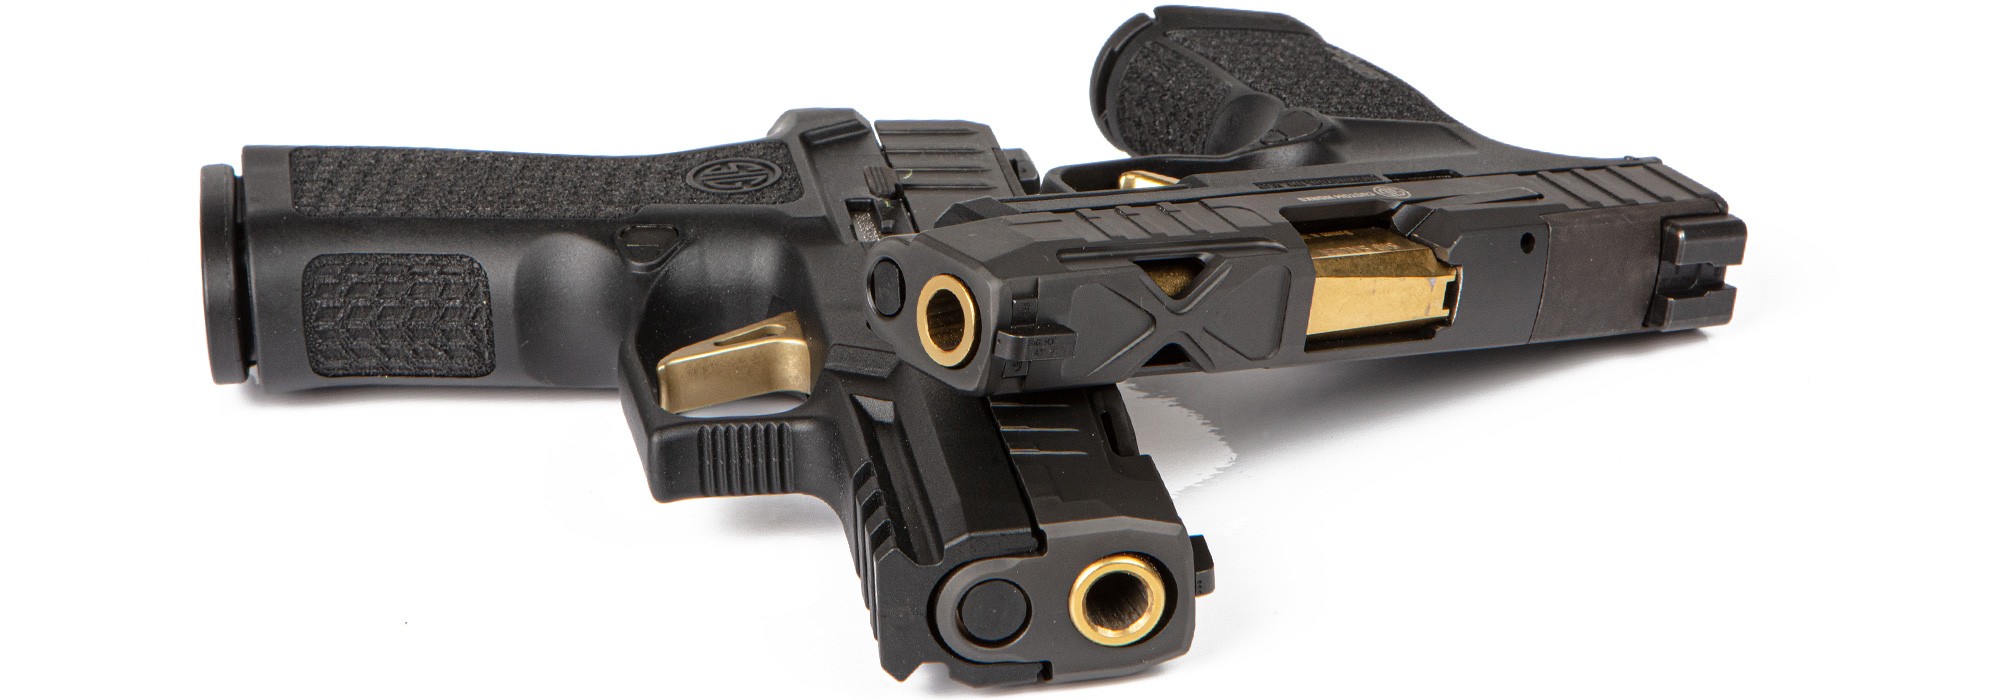 SIG P365XL SPECTRE Gold | 9mm Micro-Compact Carry Pistol